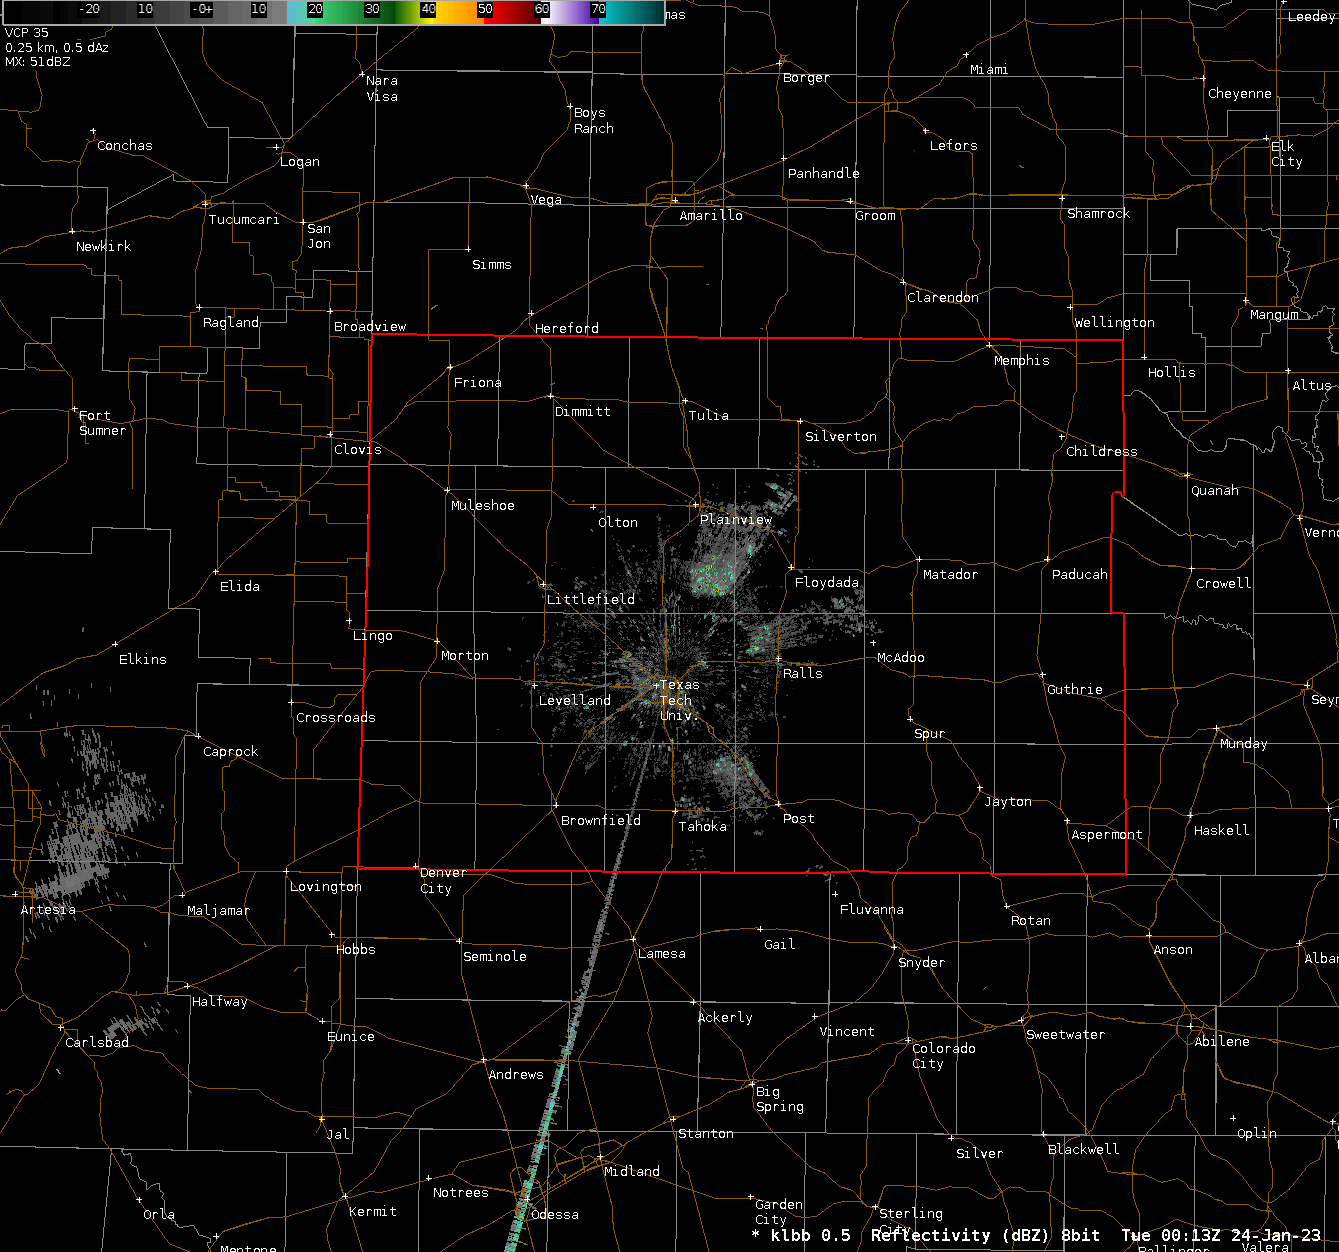 Lubbock WSR-88D radar animation valid from 6:13 pm on the 23rd to 11:41 am on the 24th of January. 